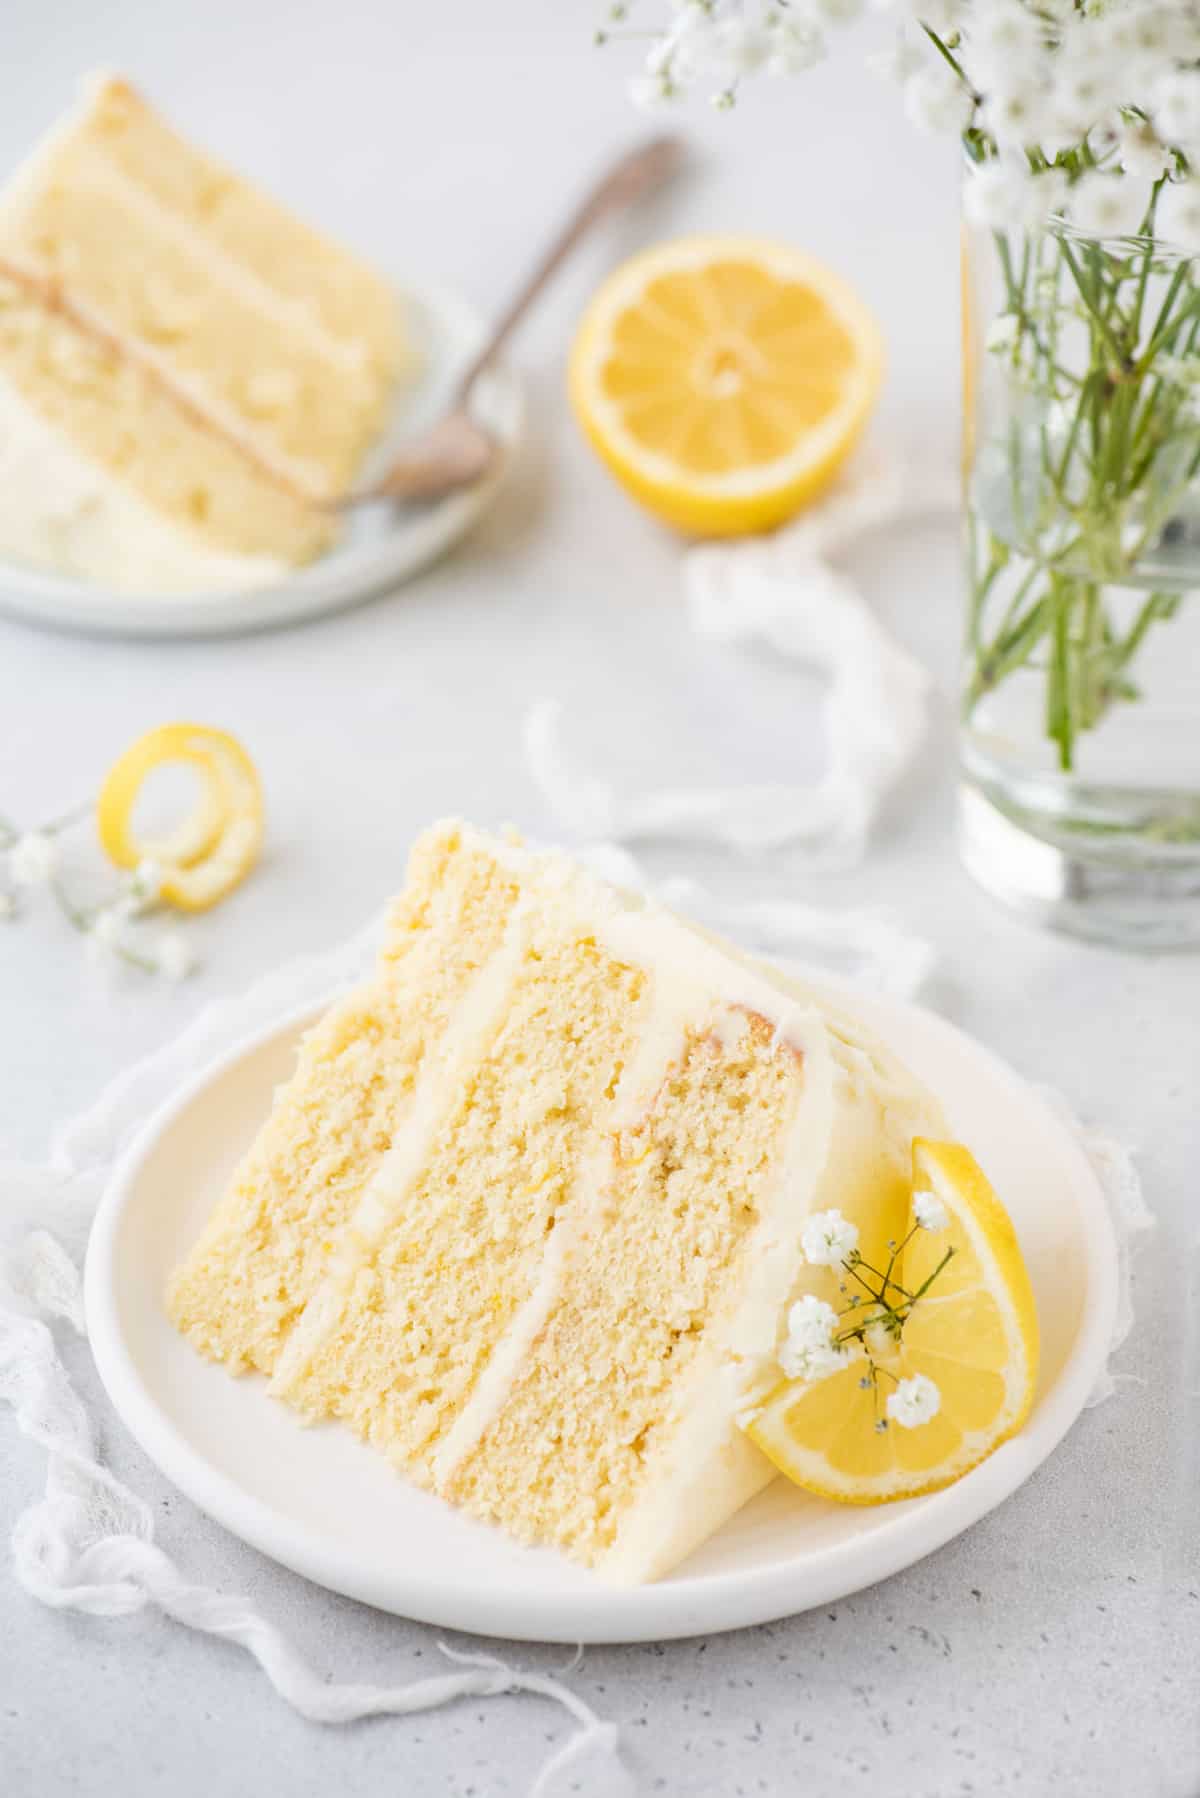 Two plates of three-layer lemon cake garnished with baby's breath and lemon slices